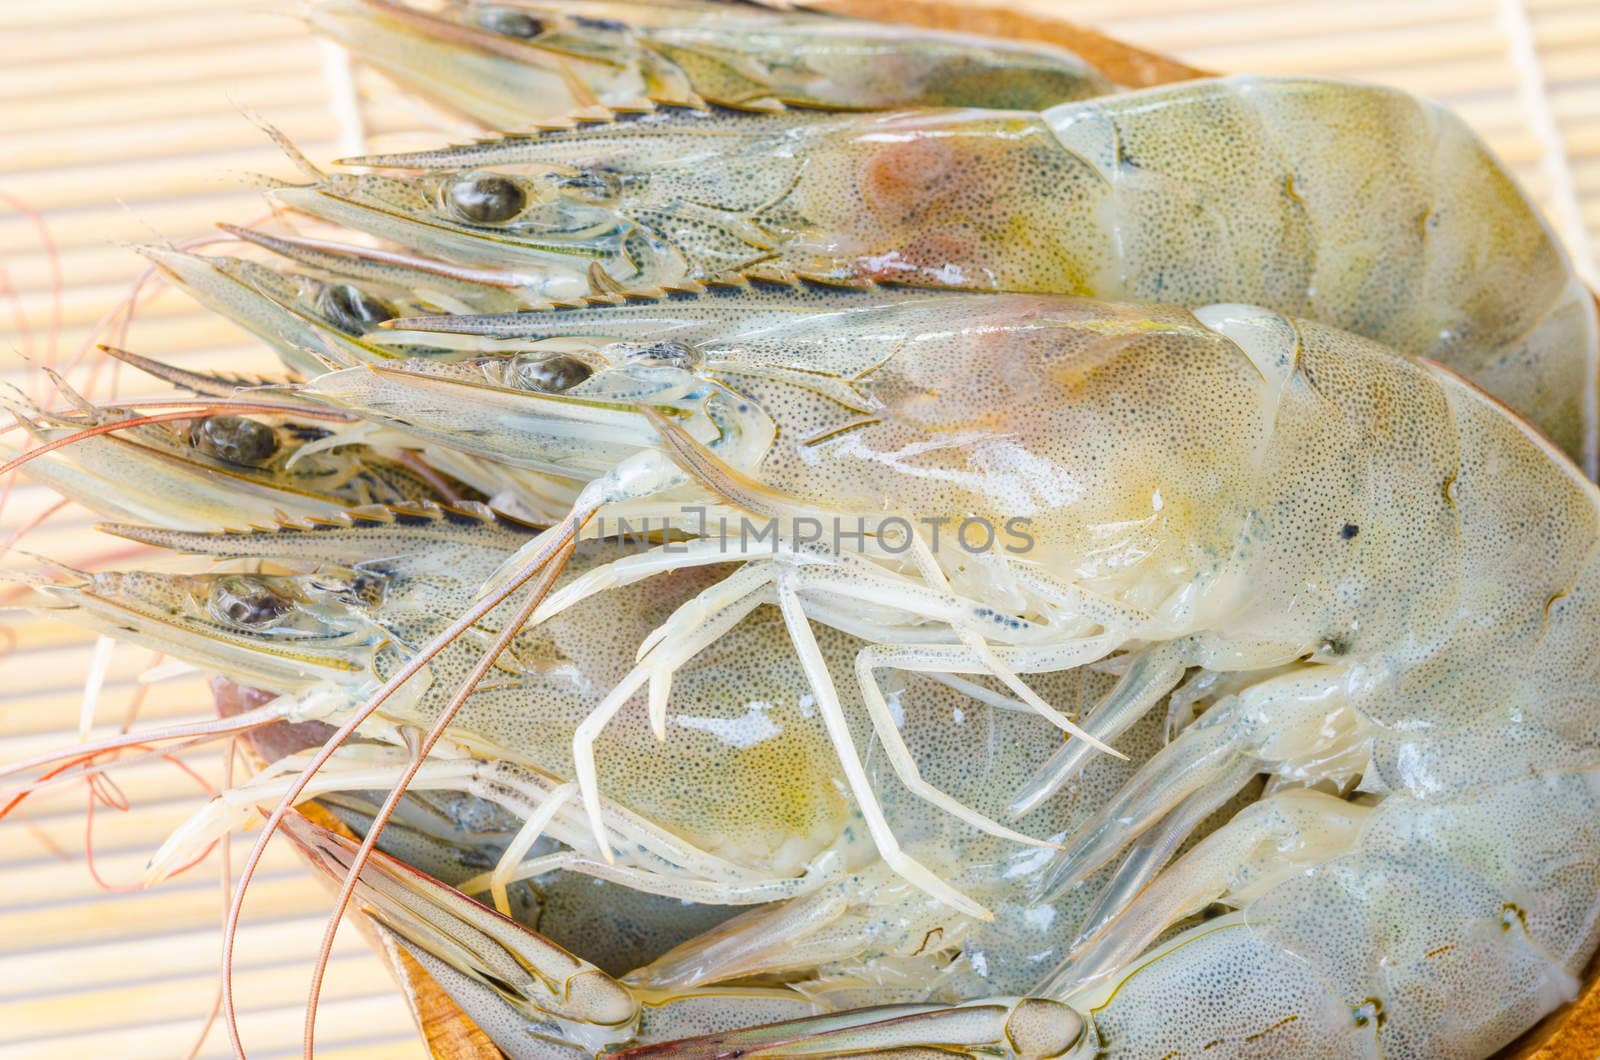 Top view of Fresh Gulf Shrimps in cup on wooden background.